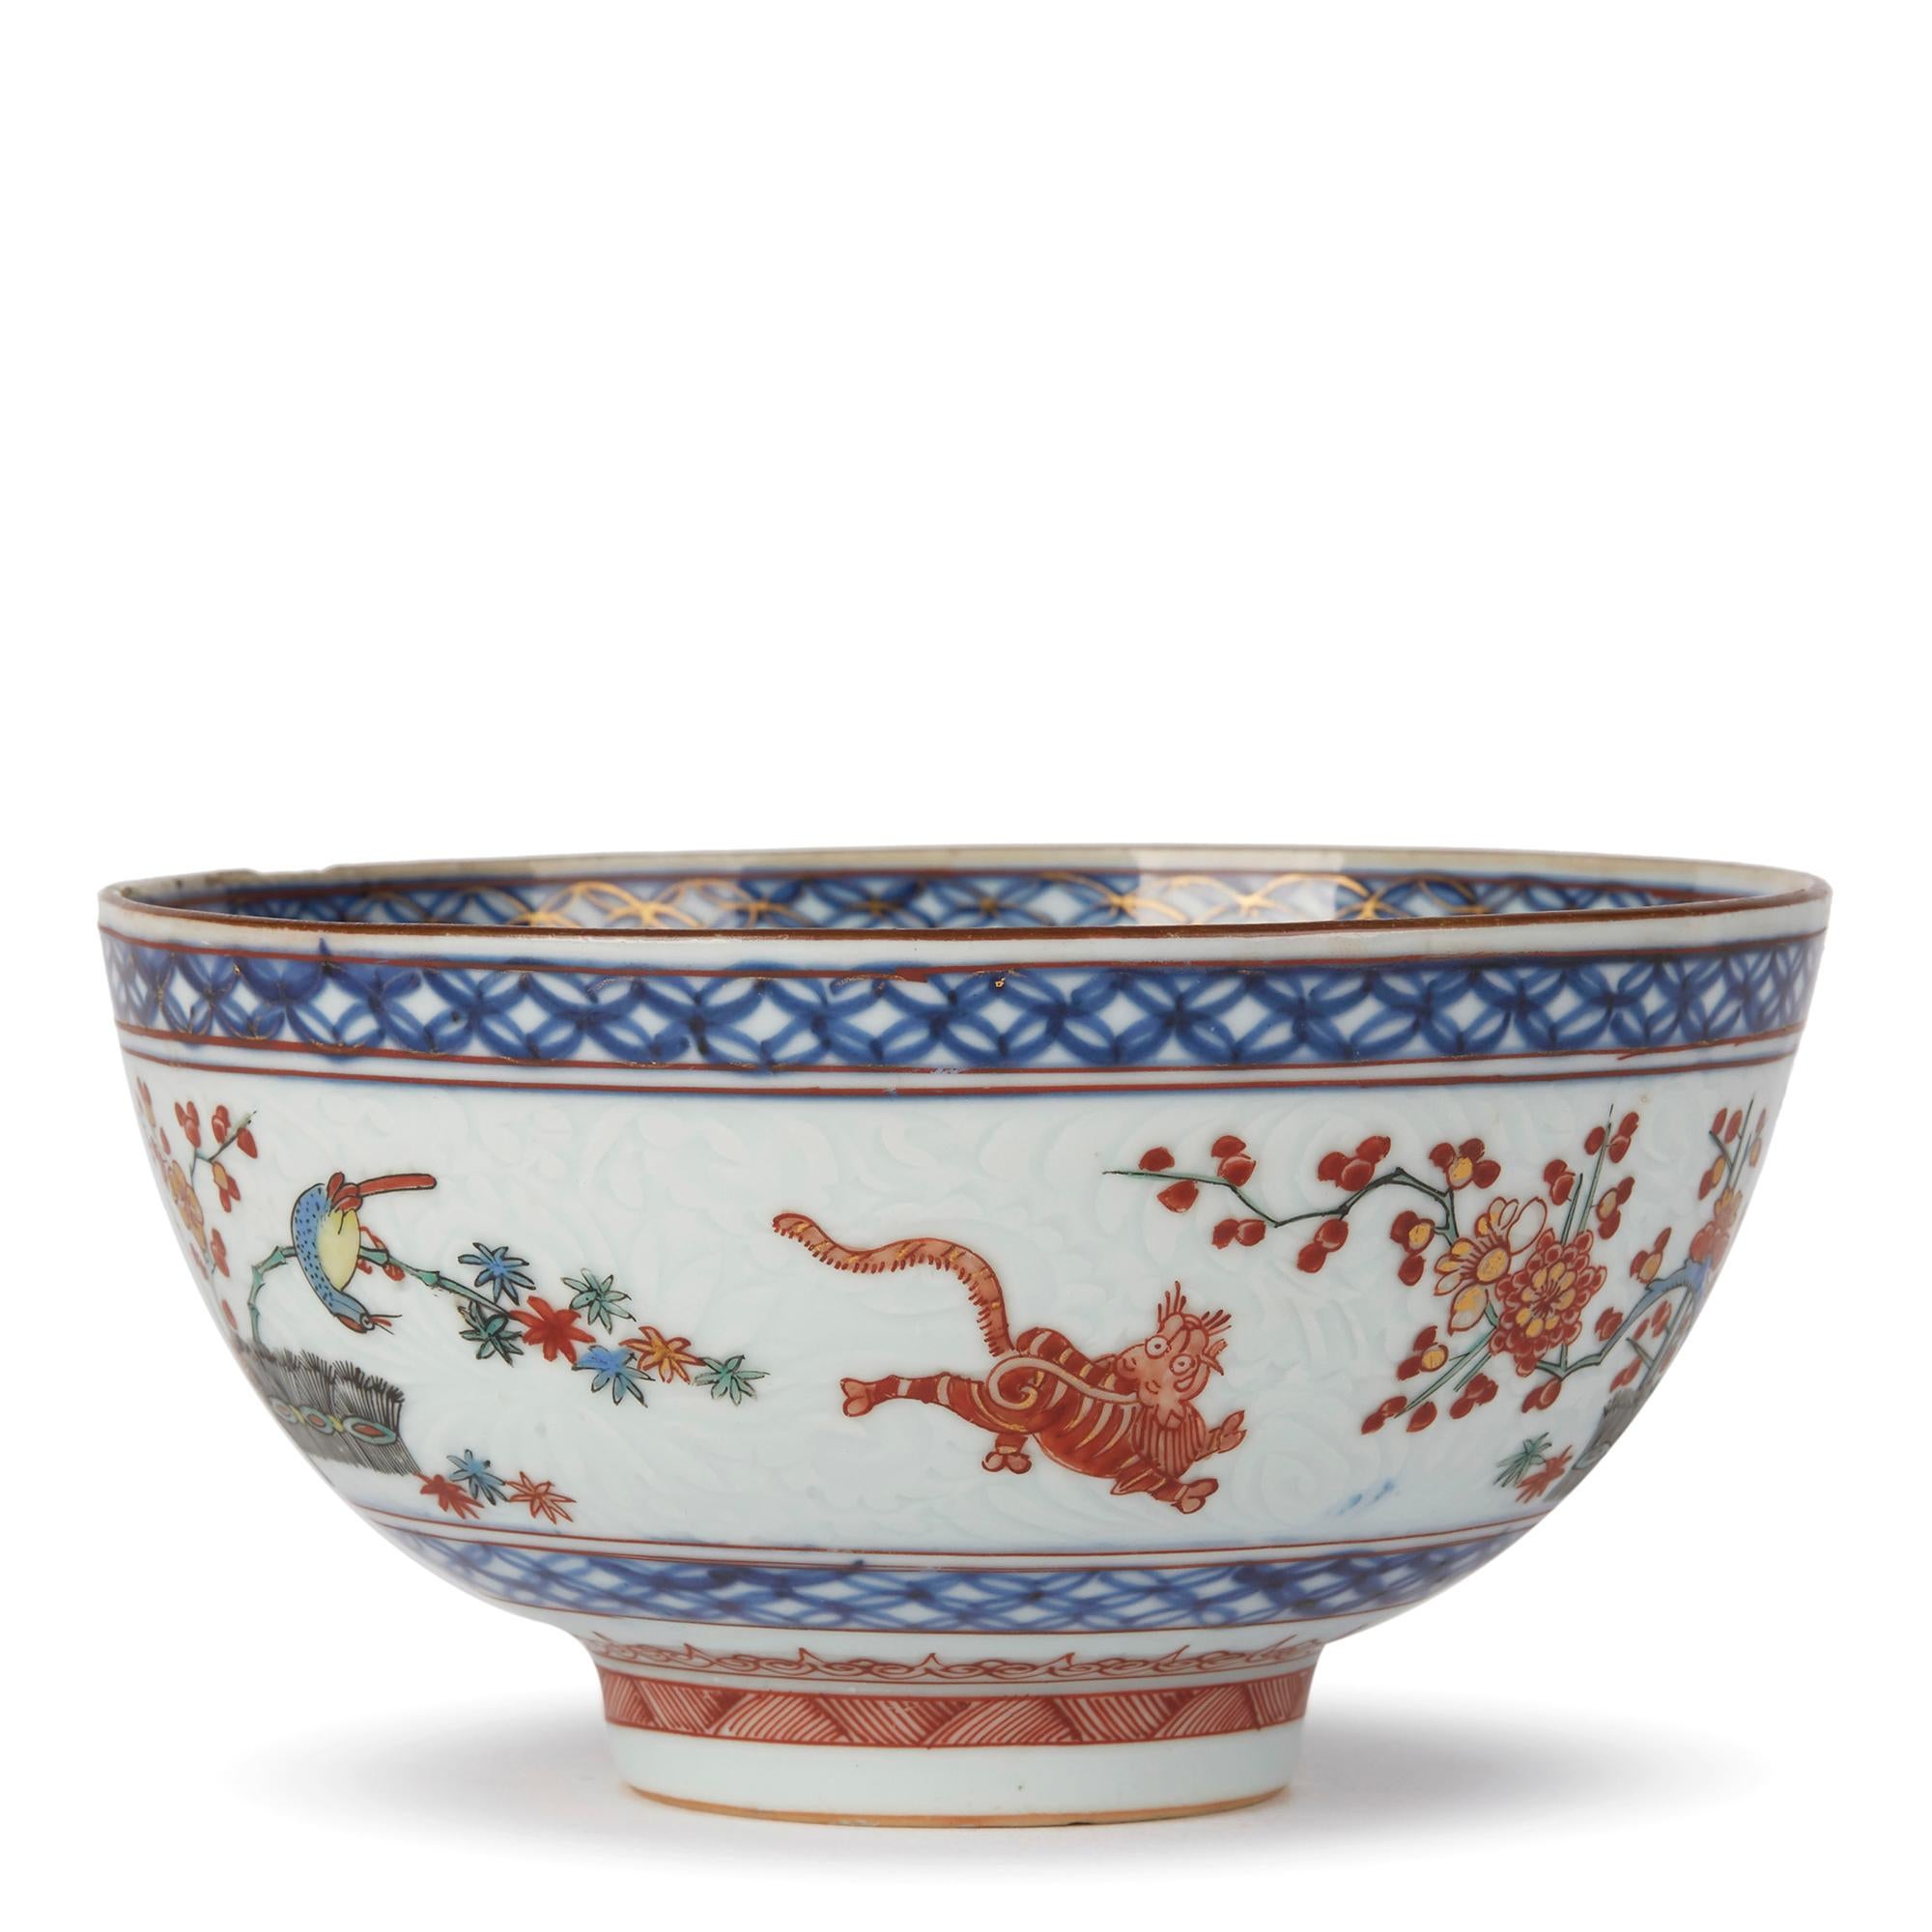 A very finely hand painted antique Chinese Kangxi Kakiemon ware porcelain bowl, probably Dutch decorated with an underglaze blue design with Fine floral relief moulding to the body over painted with a flowering prunus set in a banded hedge, a bird